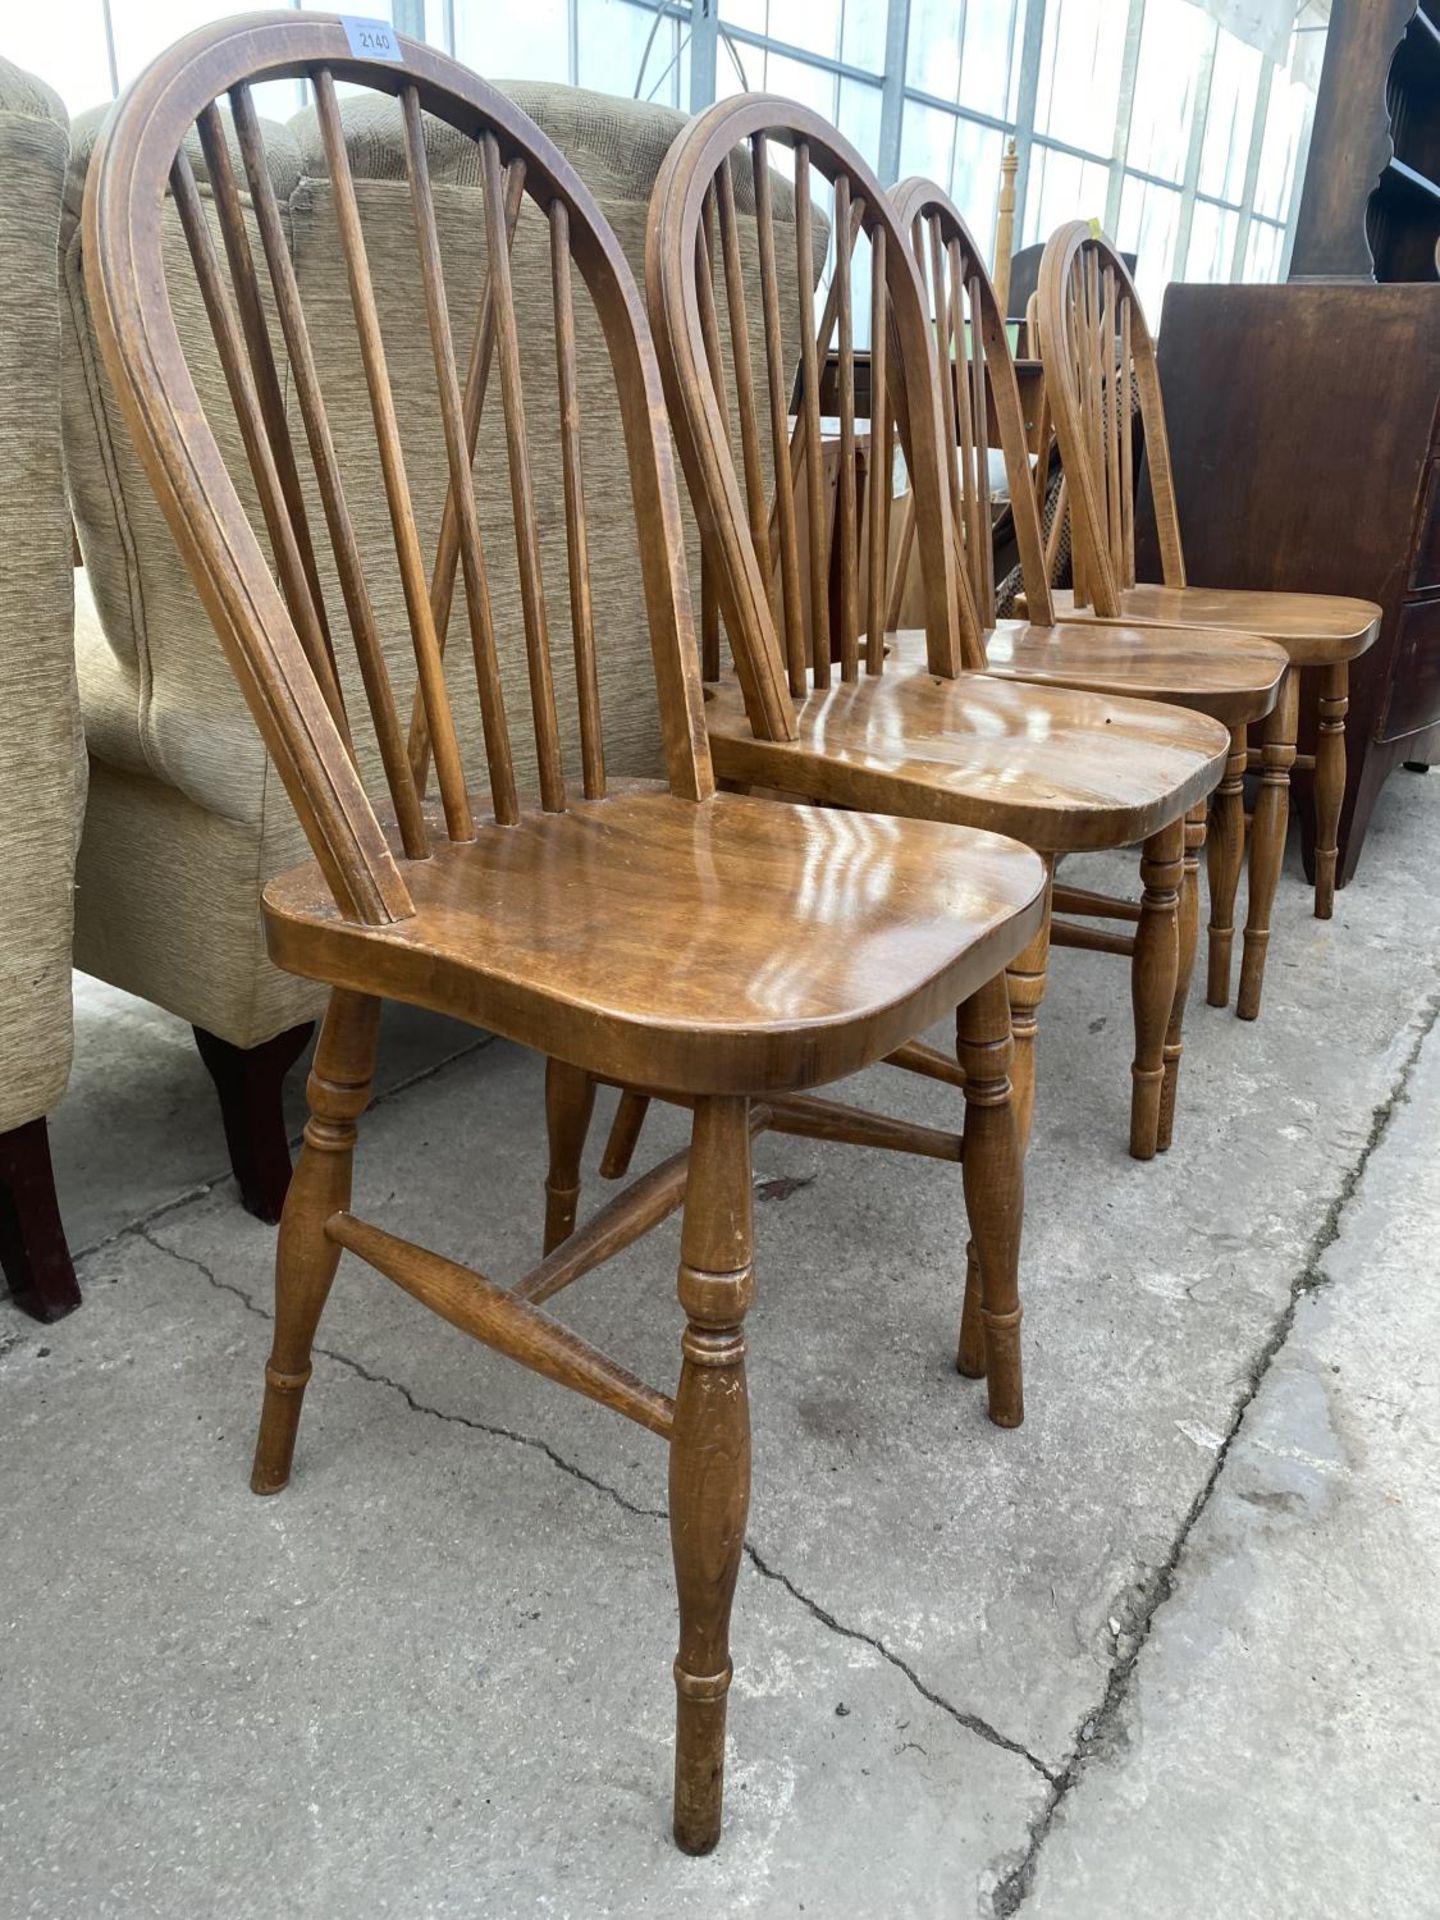 FOUR MODERN WINDSOR STYLE KITCHEN CHAIRS - Image 2 of 2